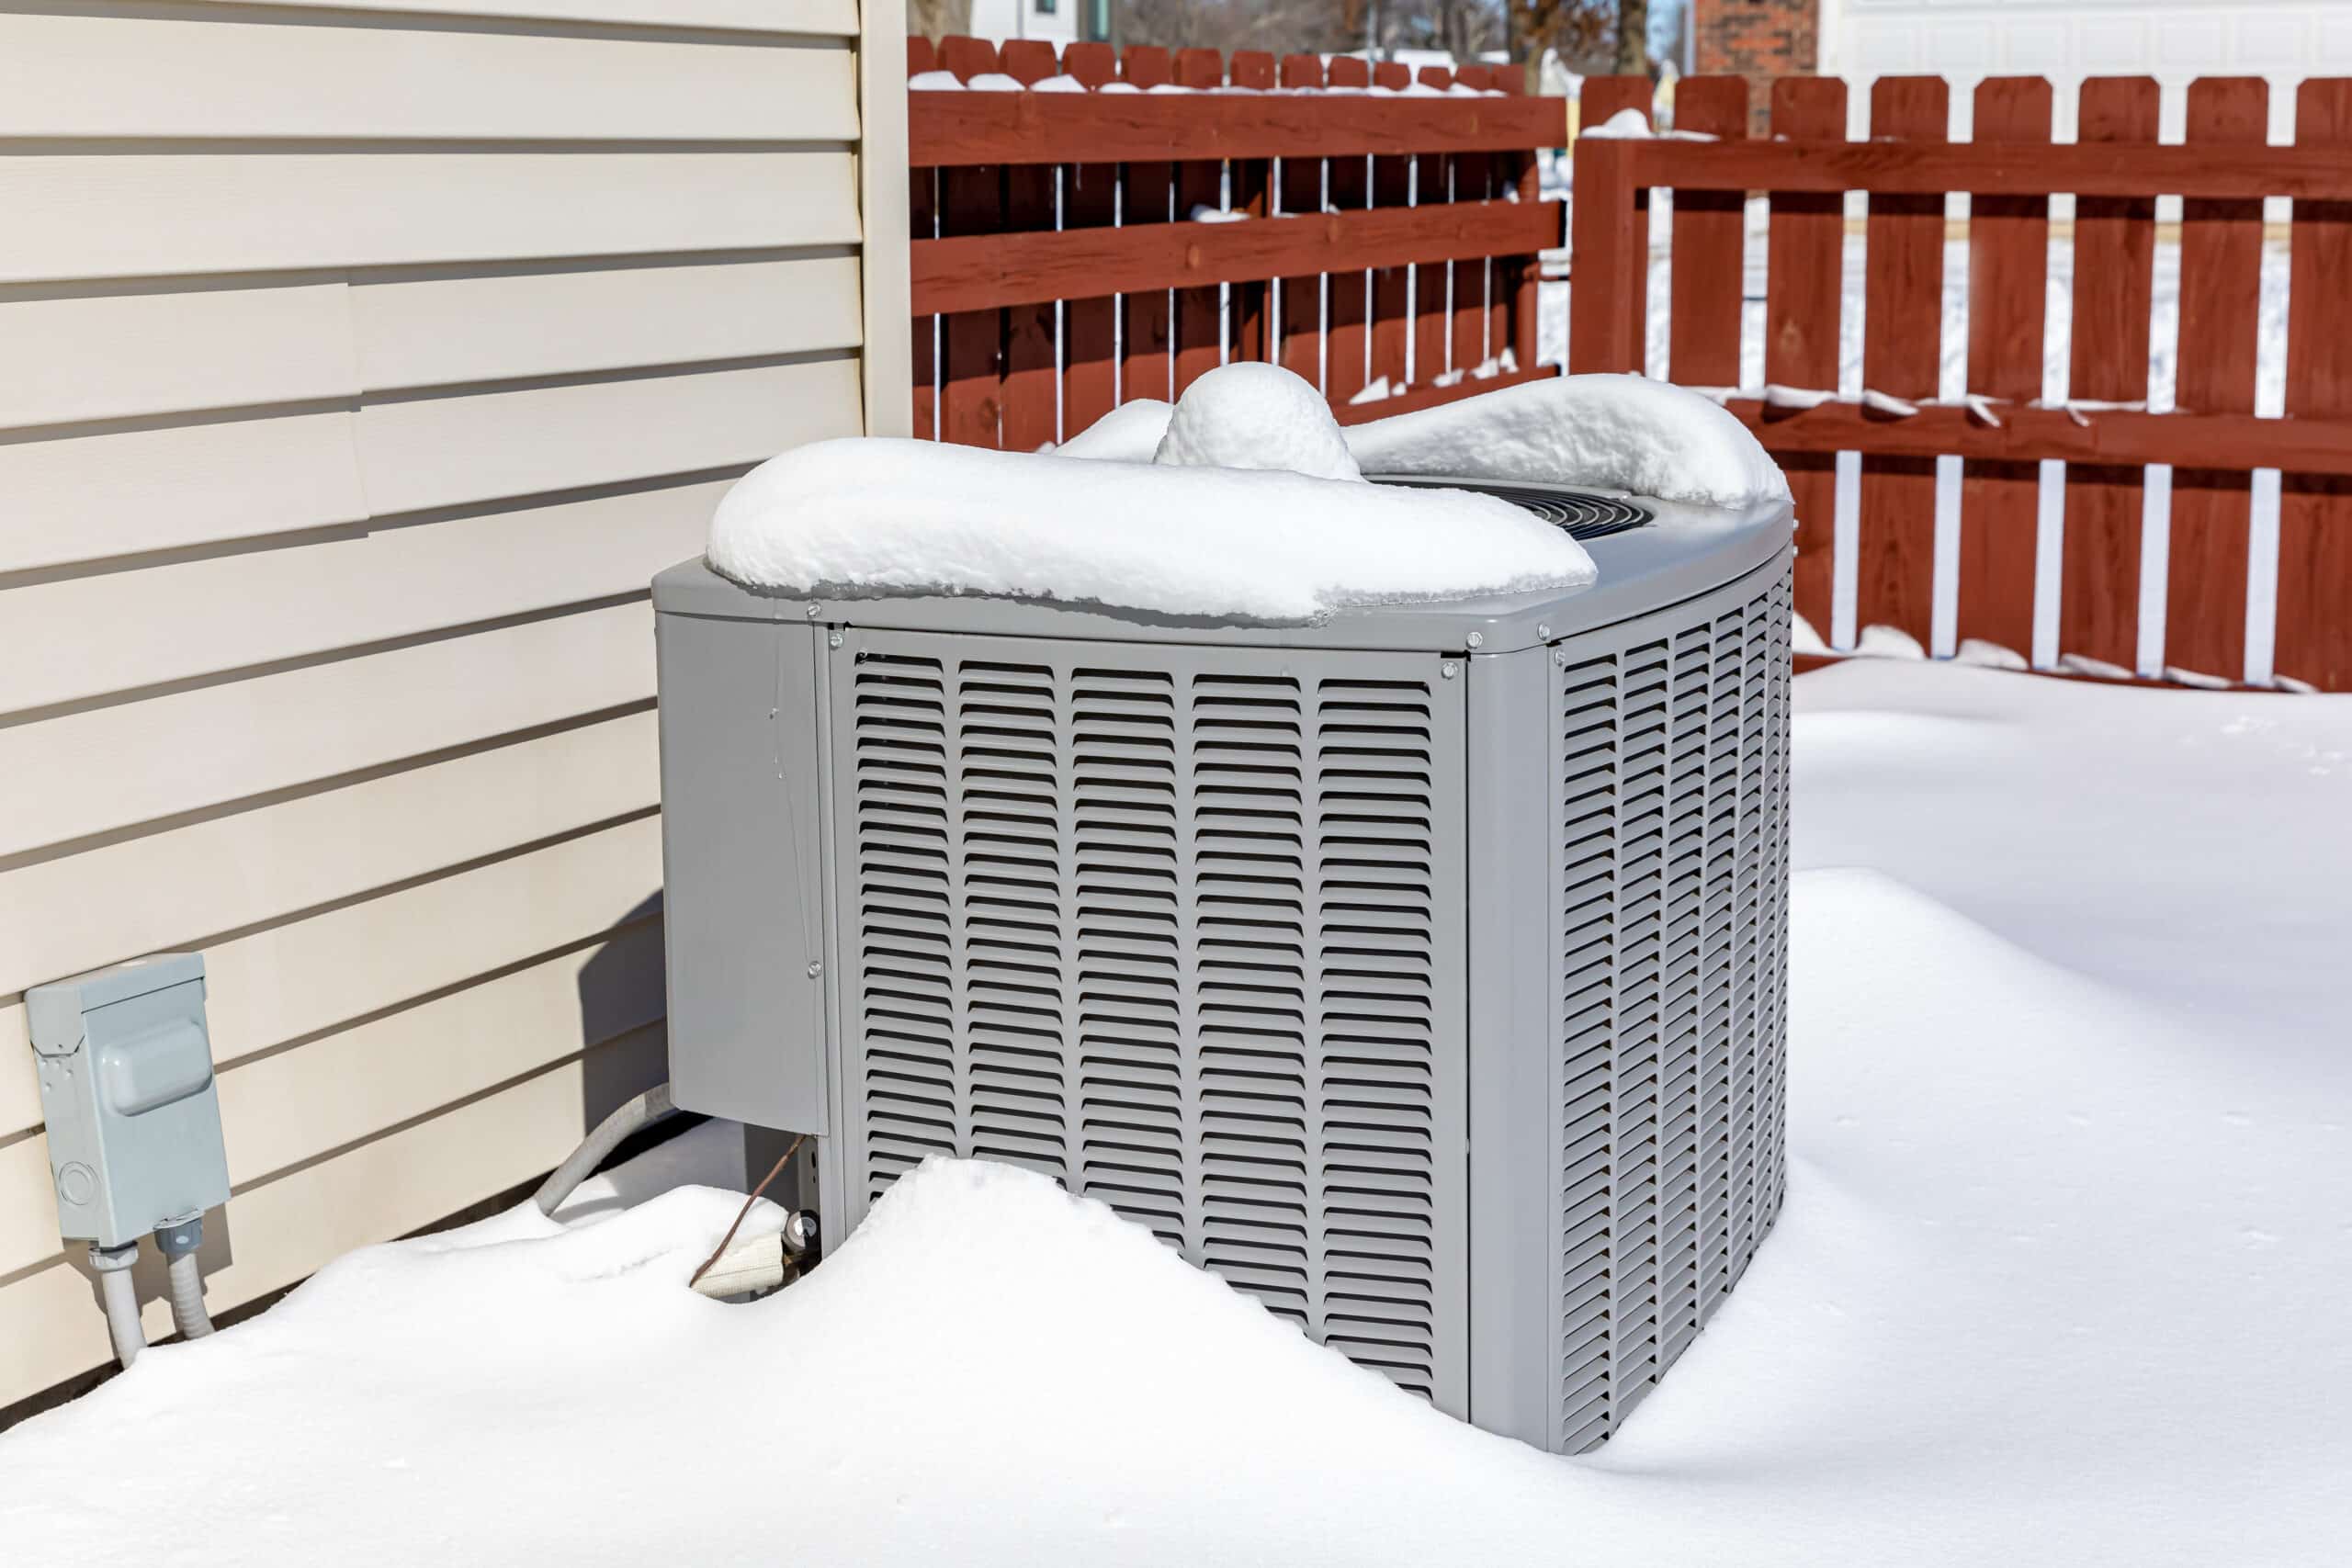 5 Essential Tips for Winterizing Your Home’s HVAC System